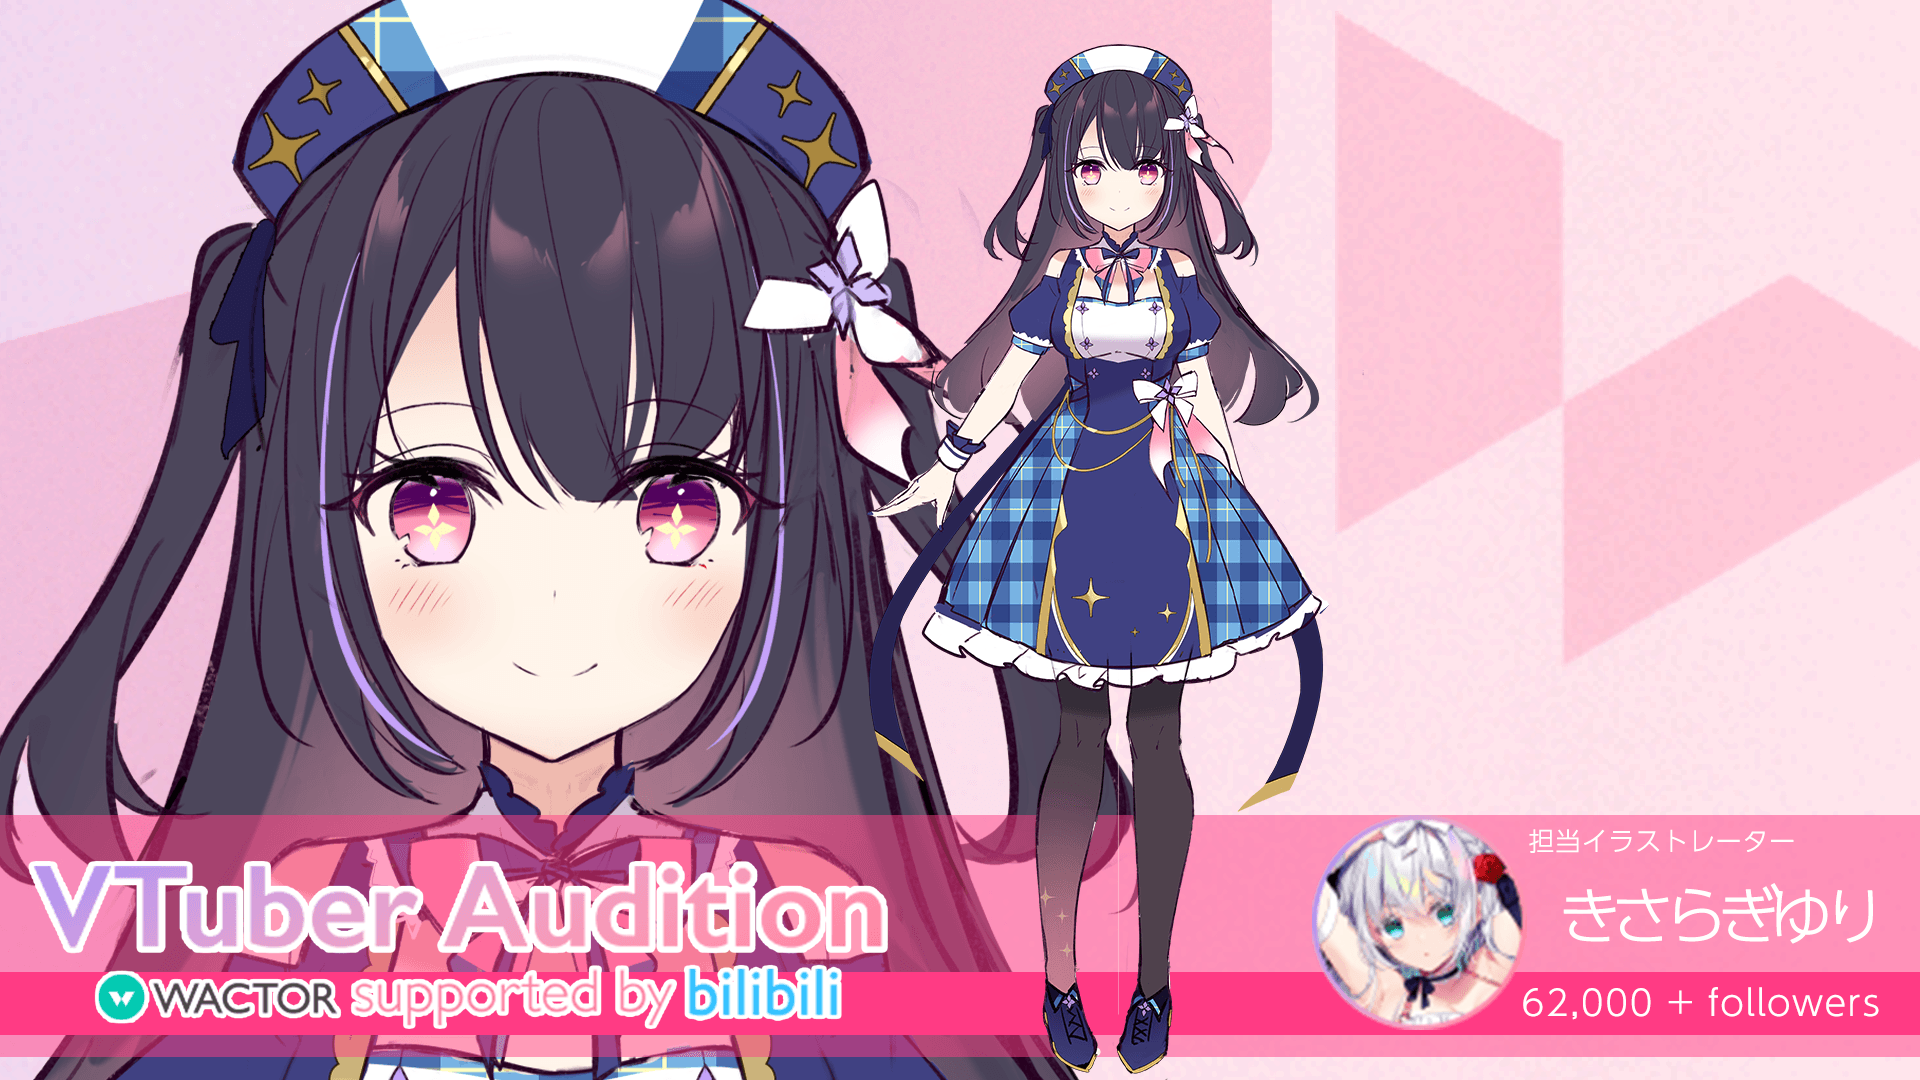 wactor-vtuber-audition-supported-by-bilibili-3